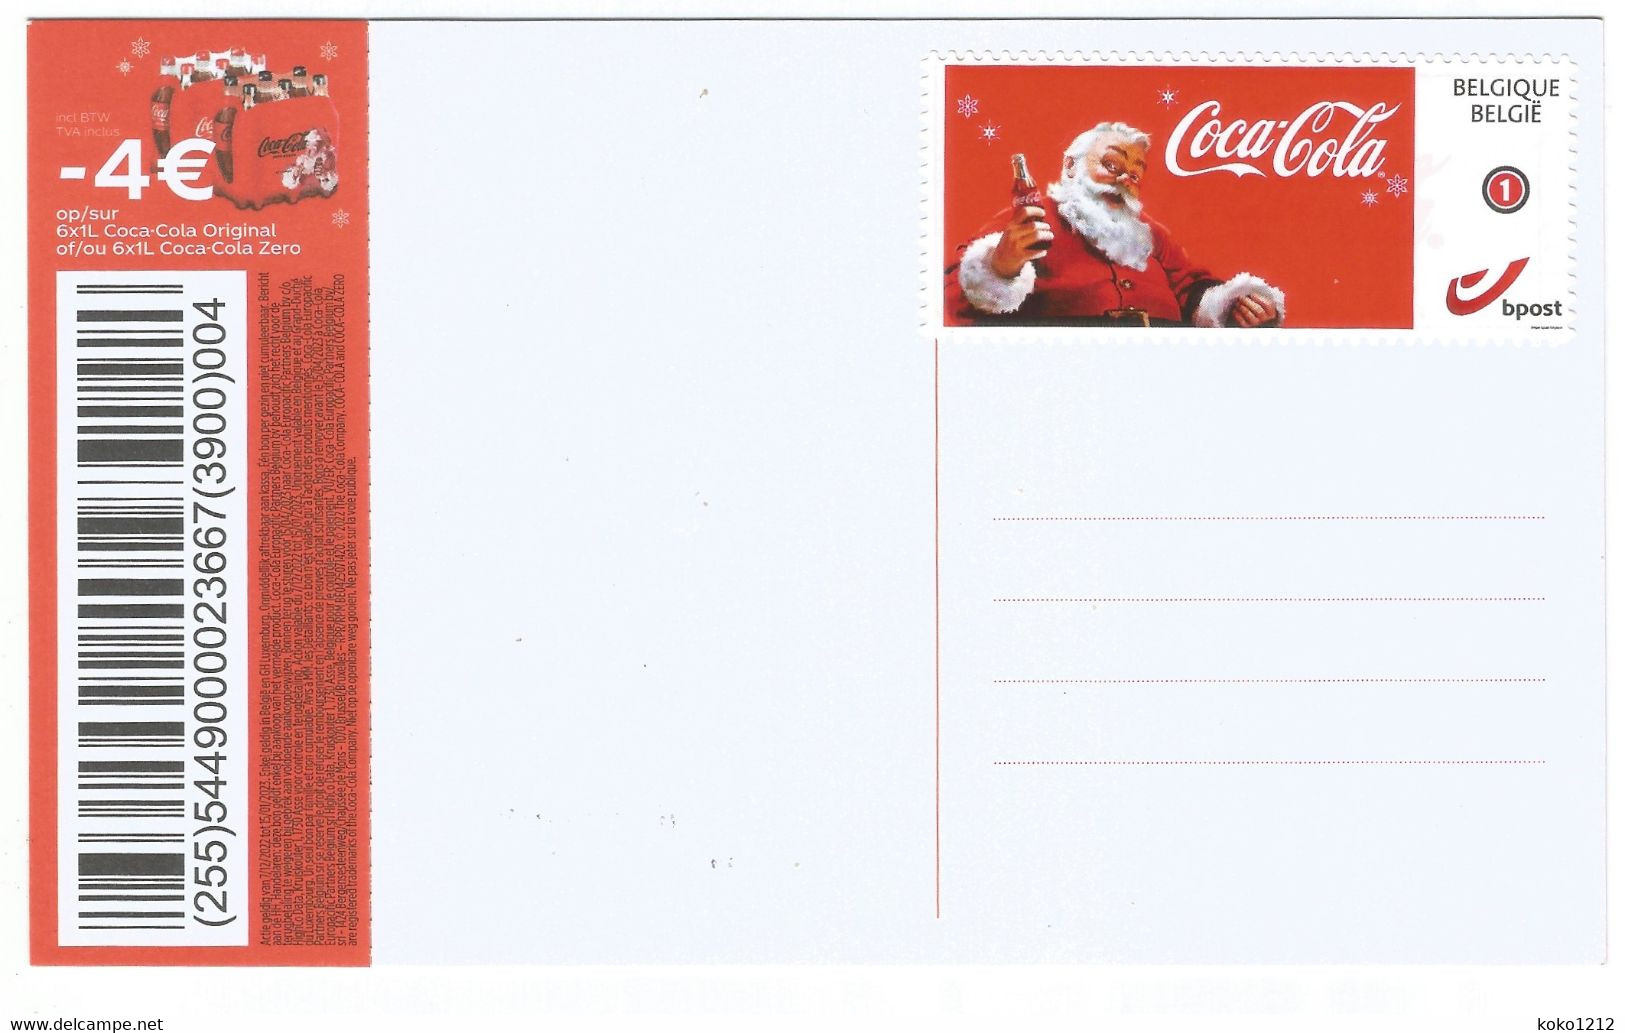 RARE CocaCola Belgium Postcard (1/2) With Private Stamp CocaCola NEUF - Lettres & Documents